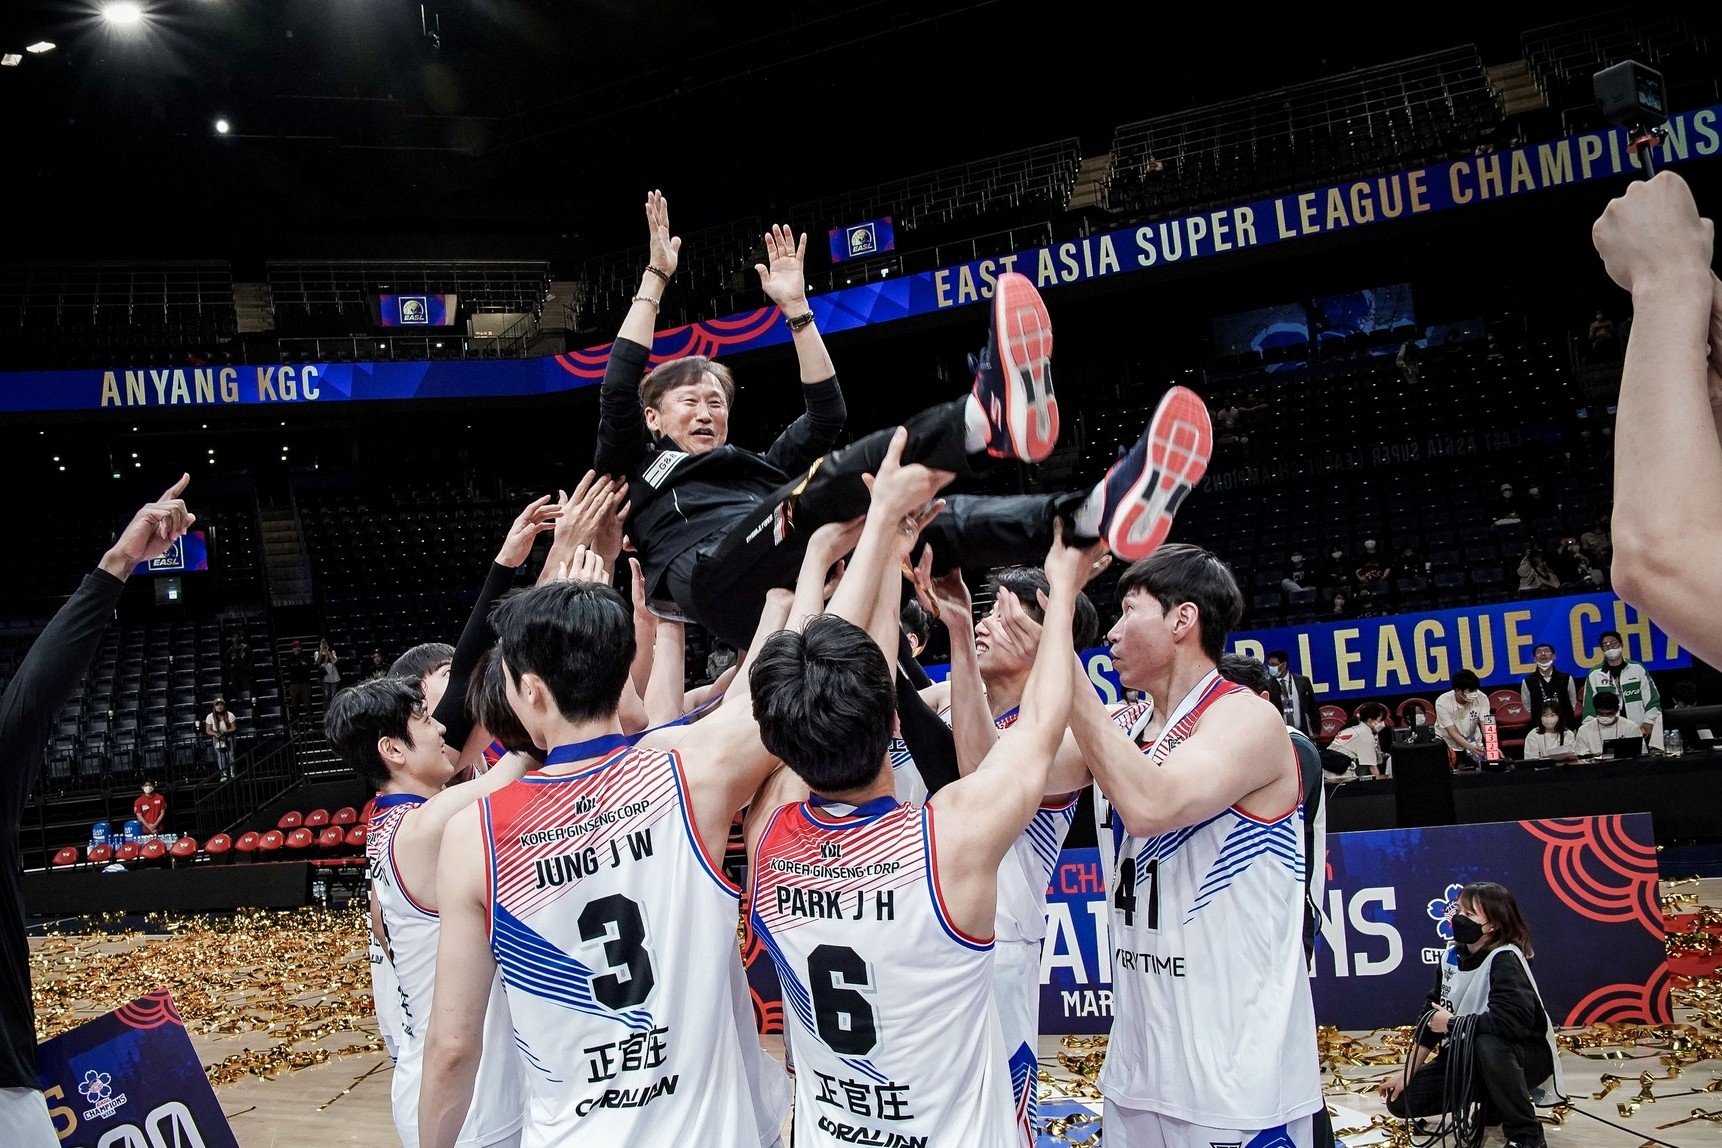 Anyang KGC won the East Asia Super League’s Champions Week tournament in March. Photo: Handout